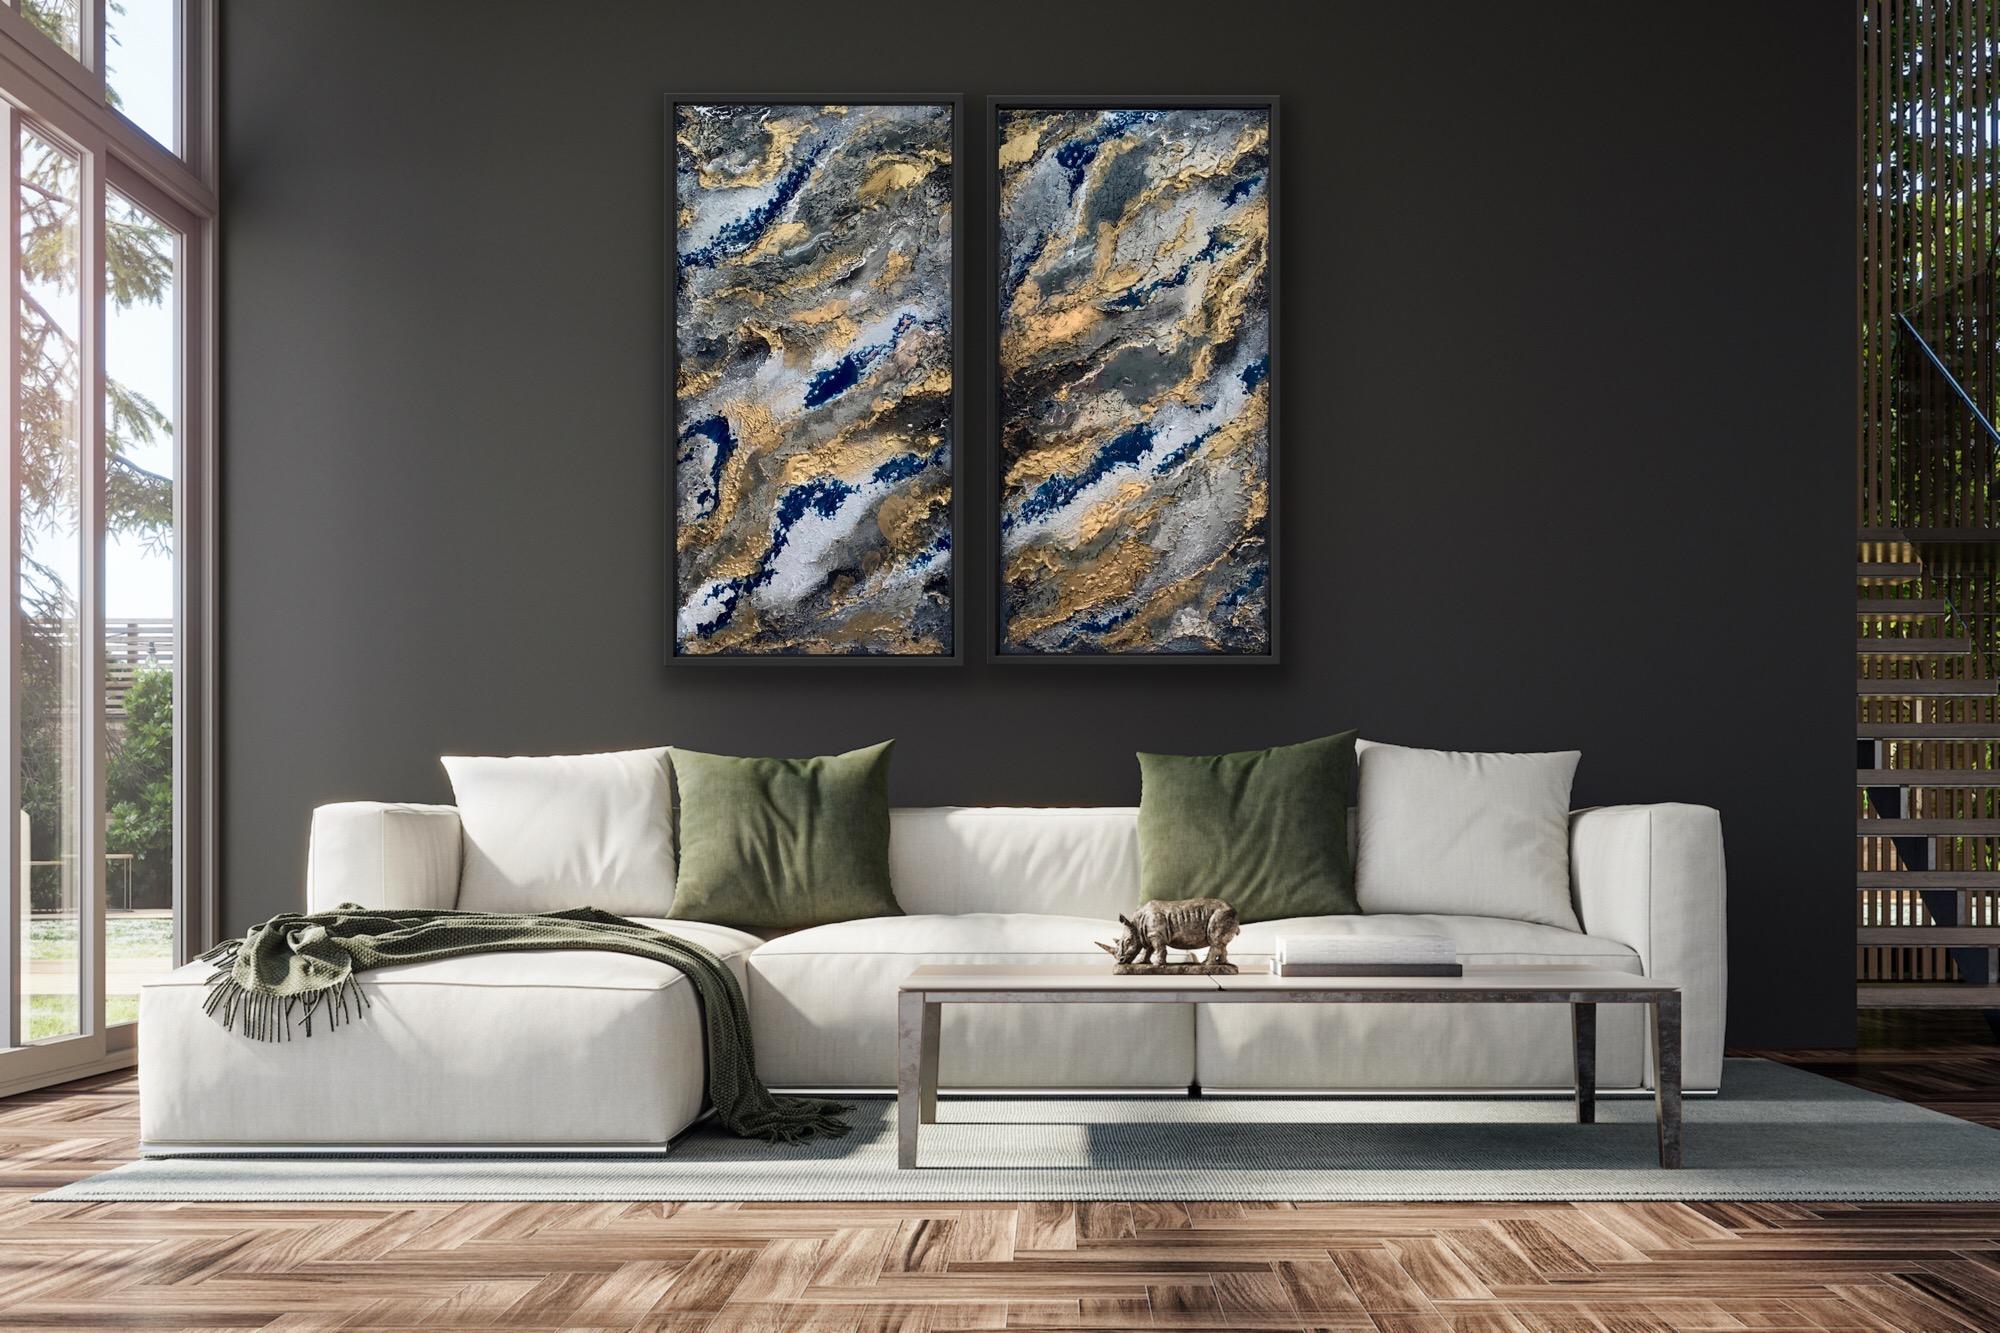 Moody colours on this stormy abstract seascape work. Gorgeous blue resin and stunning golds. Original artworks full of deep textures using artist clay, radiant with metallic gold highlights. Balanced by shiny resin areas. This piece really does